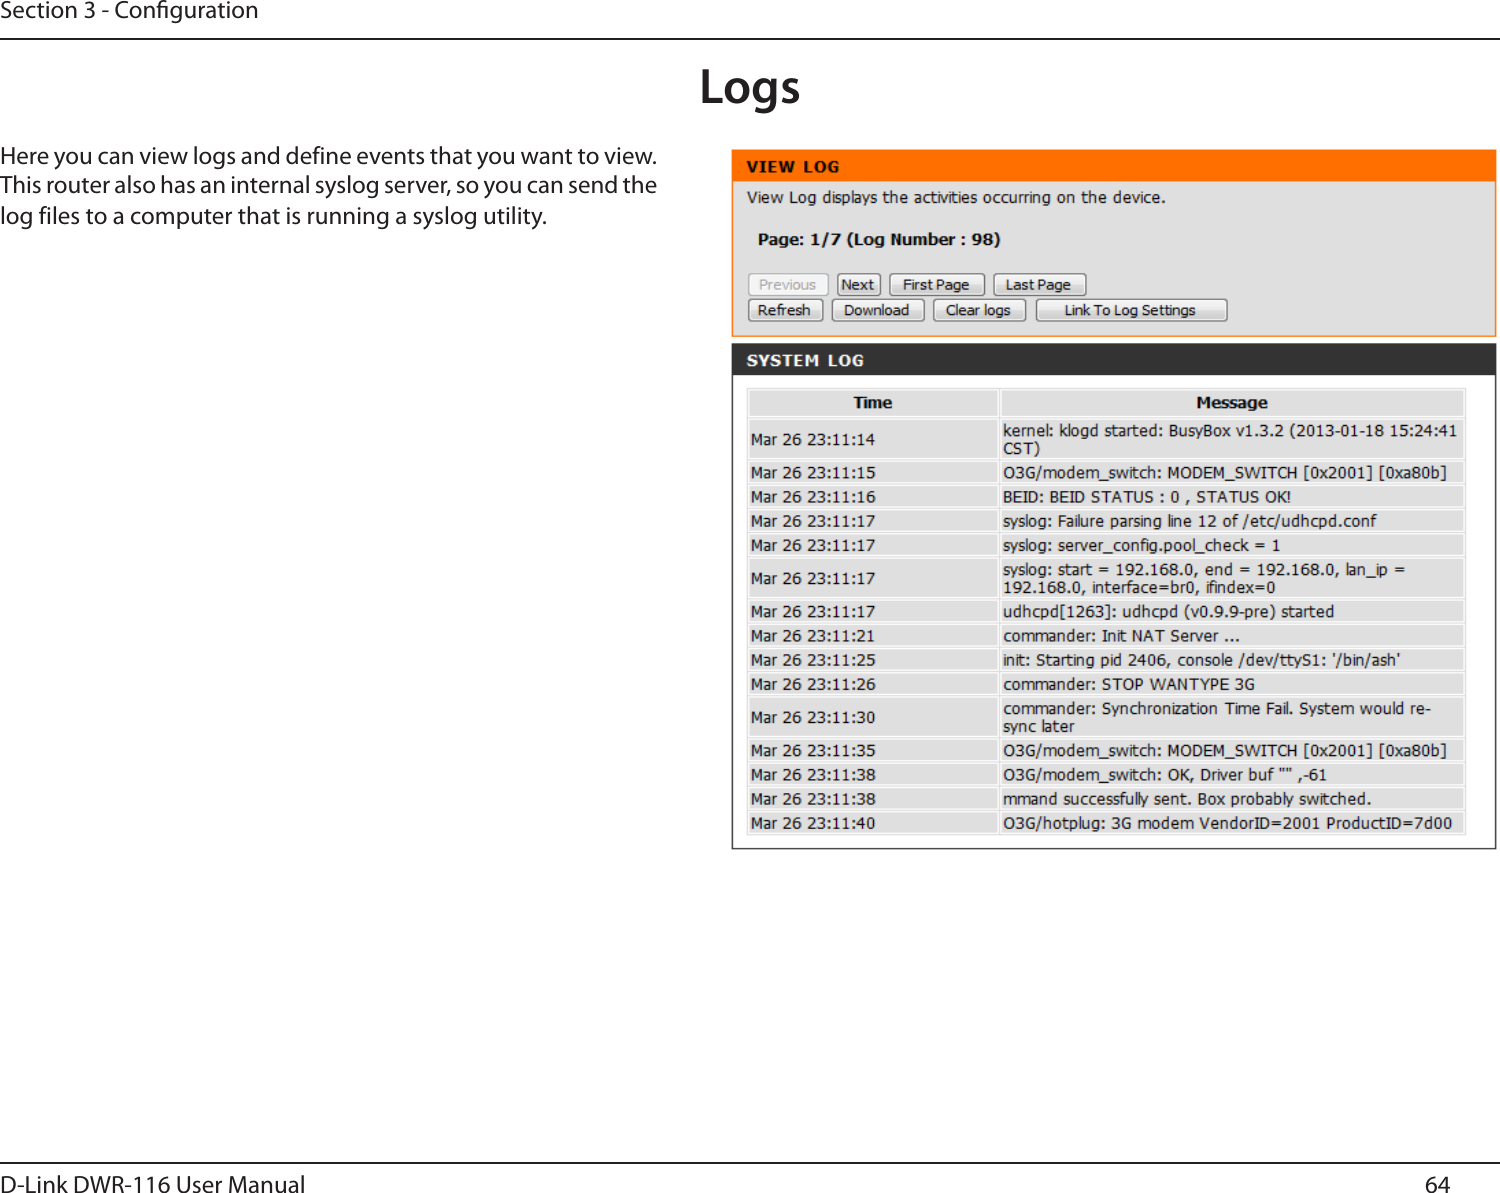 64D-Link DWR-116 User ManualSection 3 - CongurationLogsHere you can view logs and define events that you want to view. This router also has an internal syslog server, so you can send the log files to a computer that is running a syslog utility.